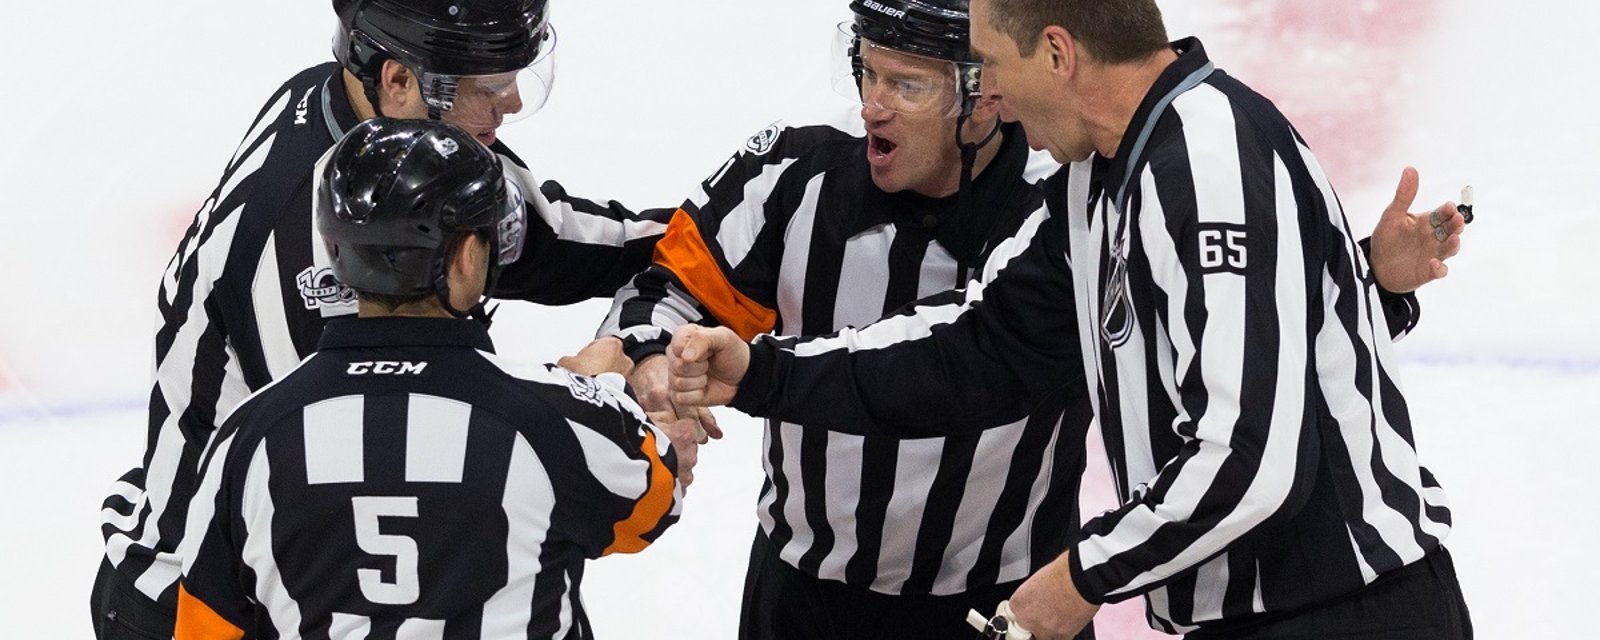 NHL officials make a brutal call in the very first game of the day!